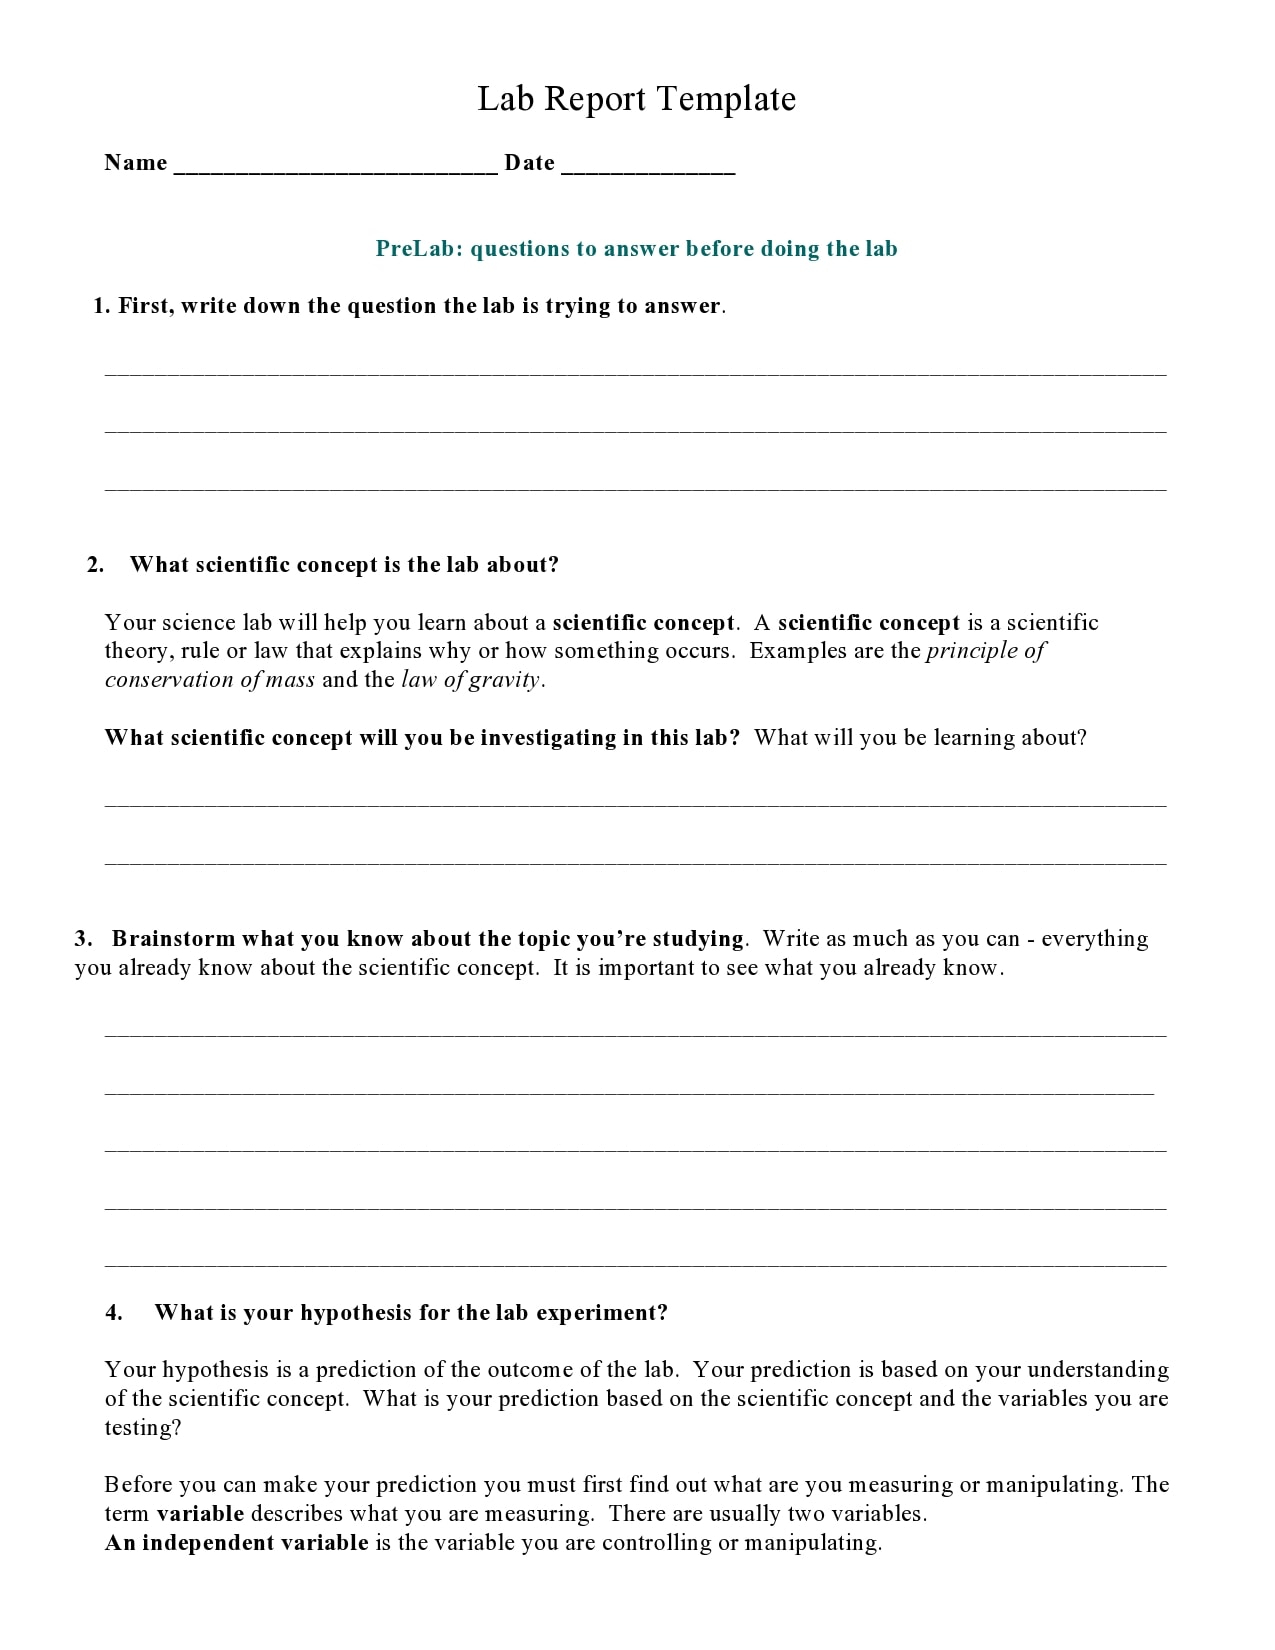 10 Useful Lab Report Examples (& Free Templates) Regarding Science Lab Report Template